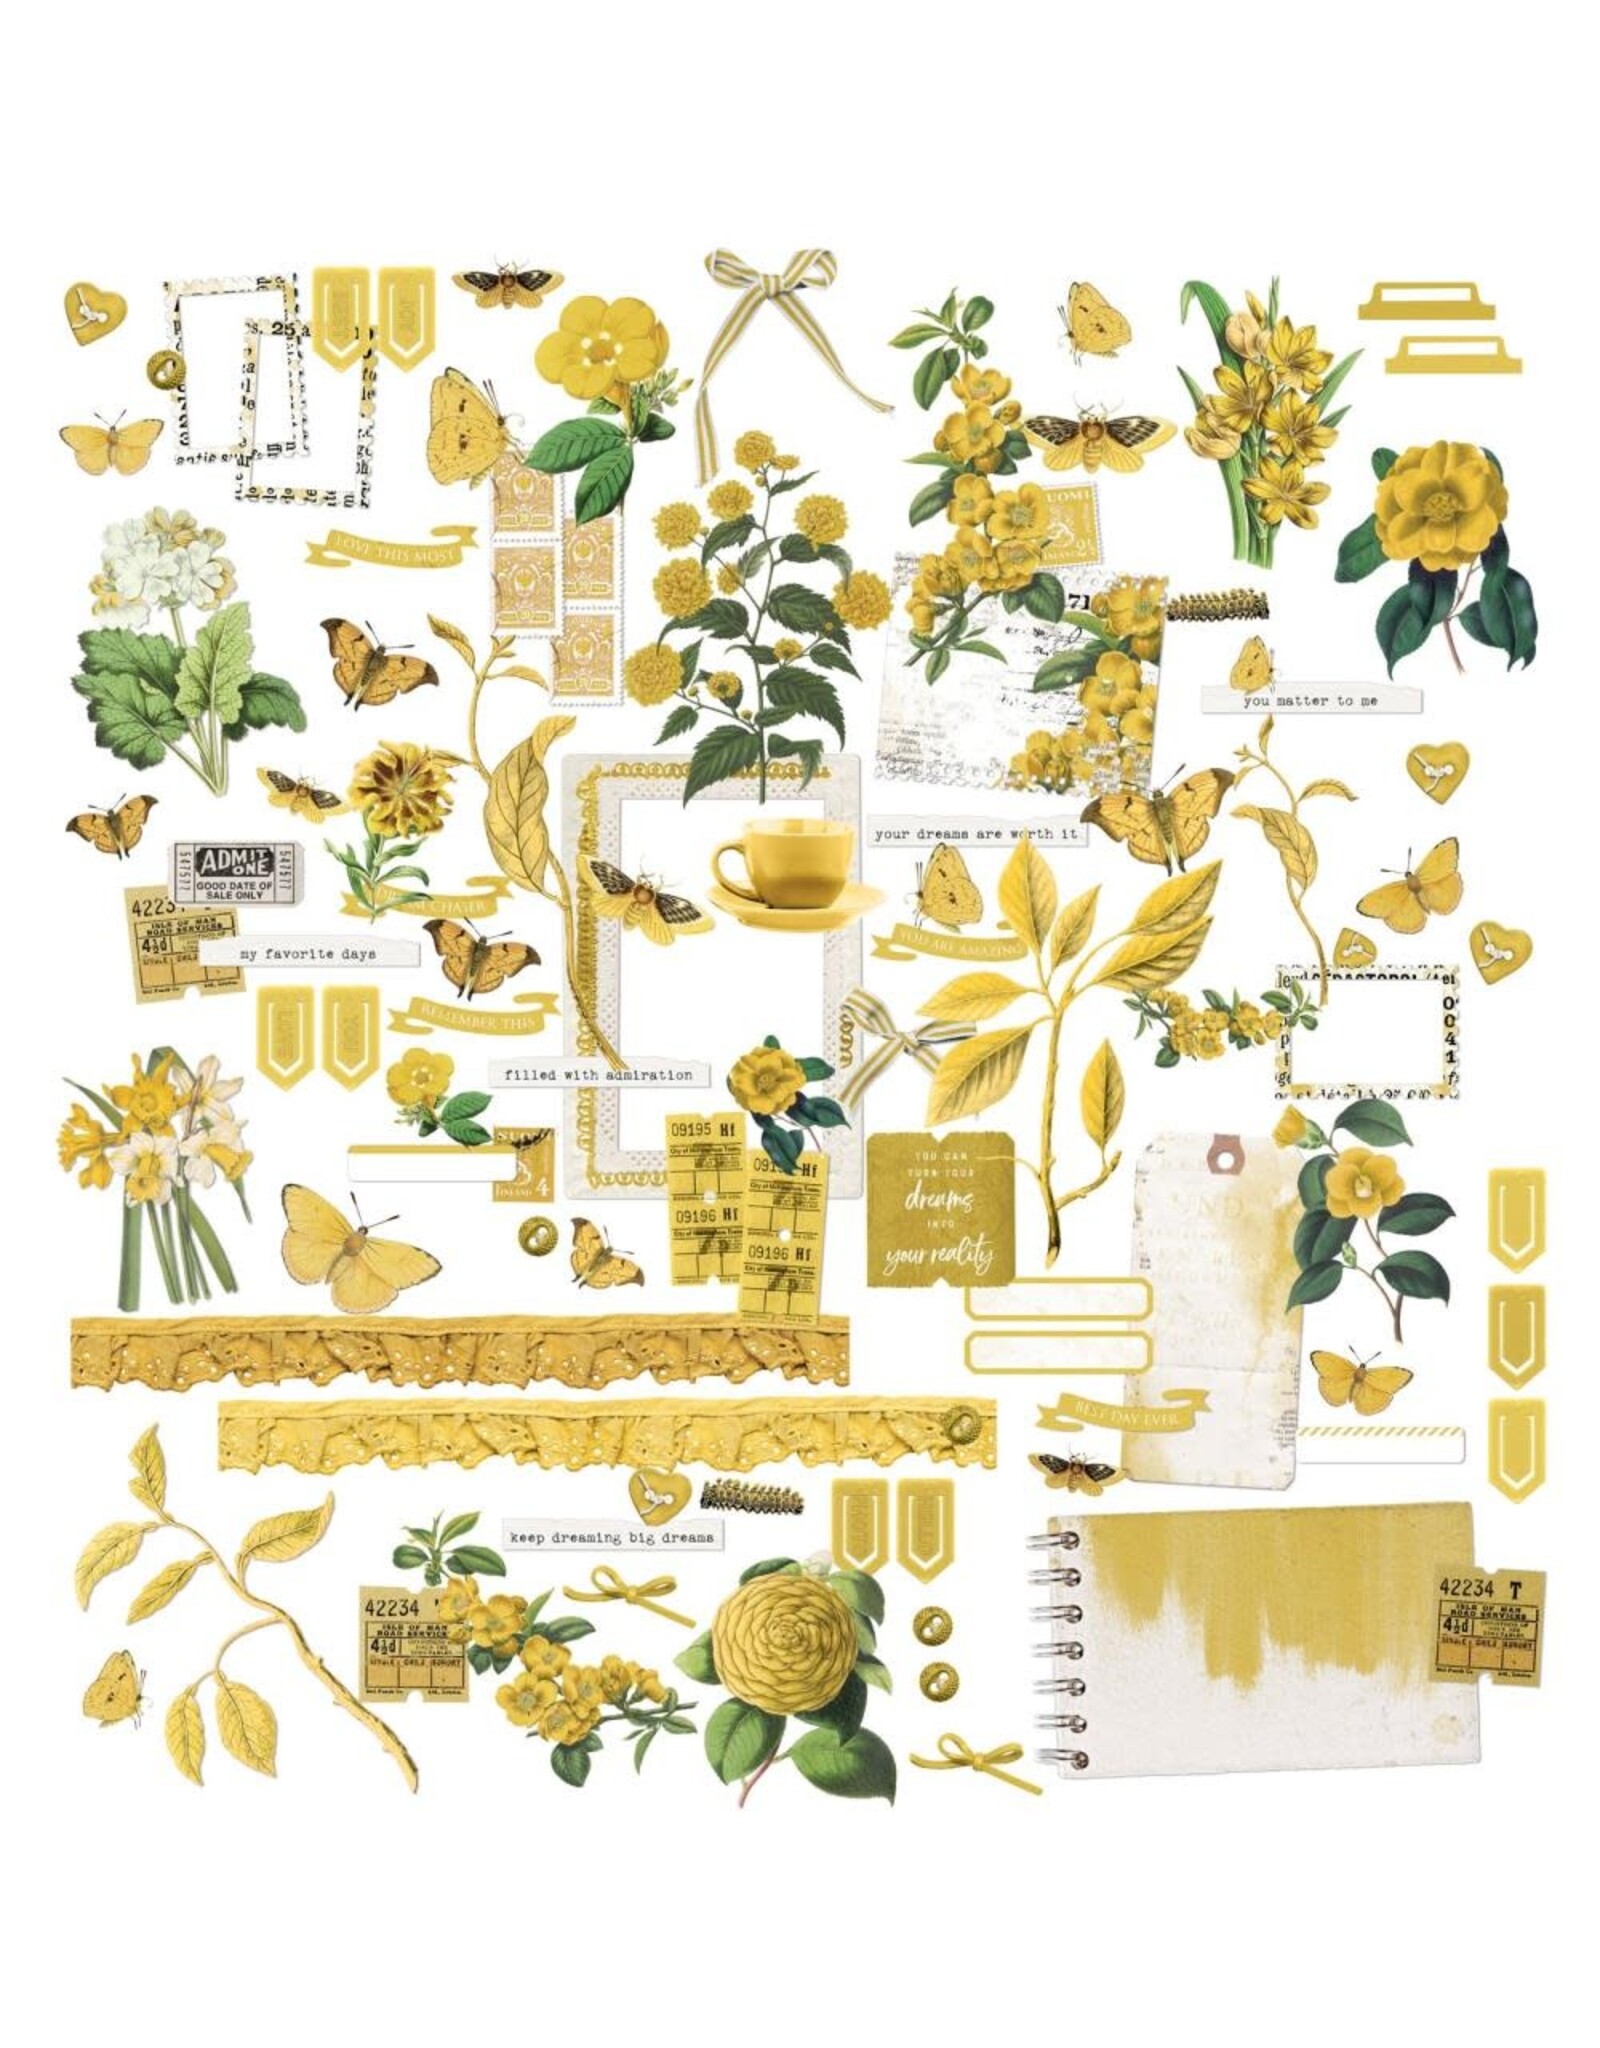 49 AND MARKET 49 AND MARKET COLOR SWATCH OCHRE 6x12 LASER CUT ELEMENTS  99/PK